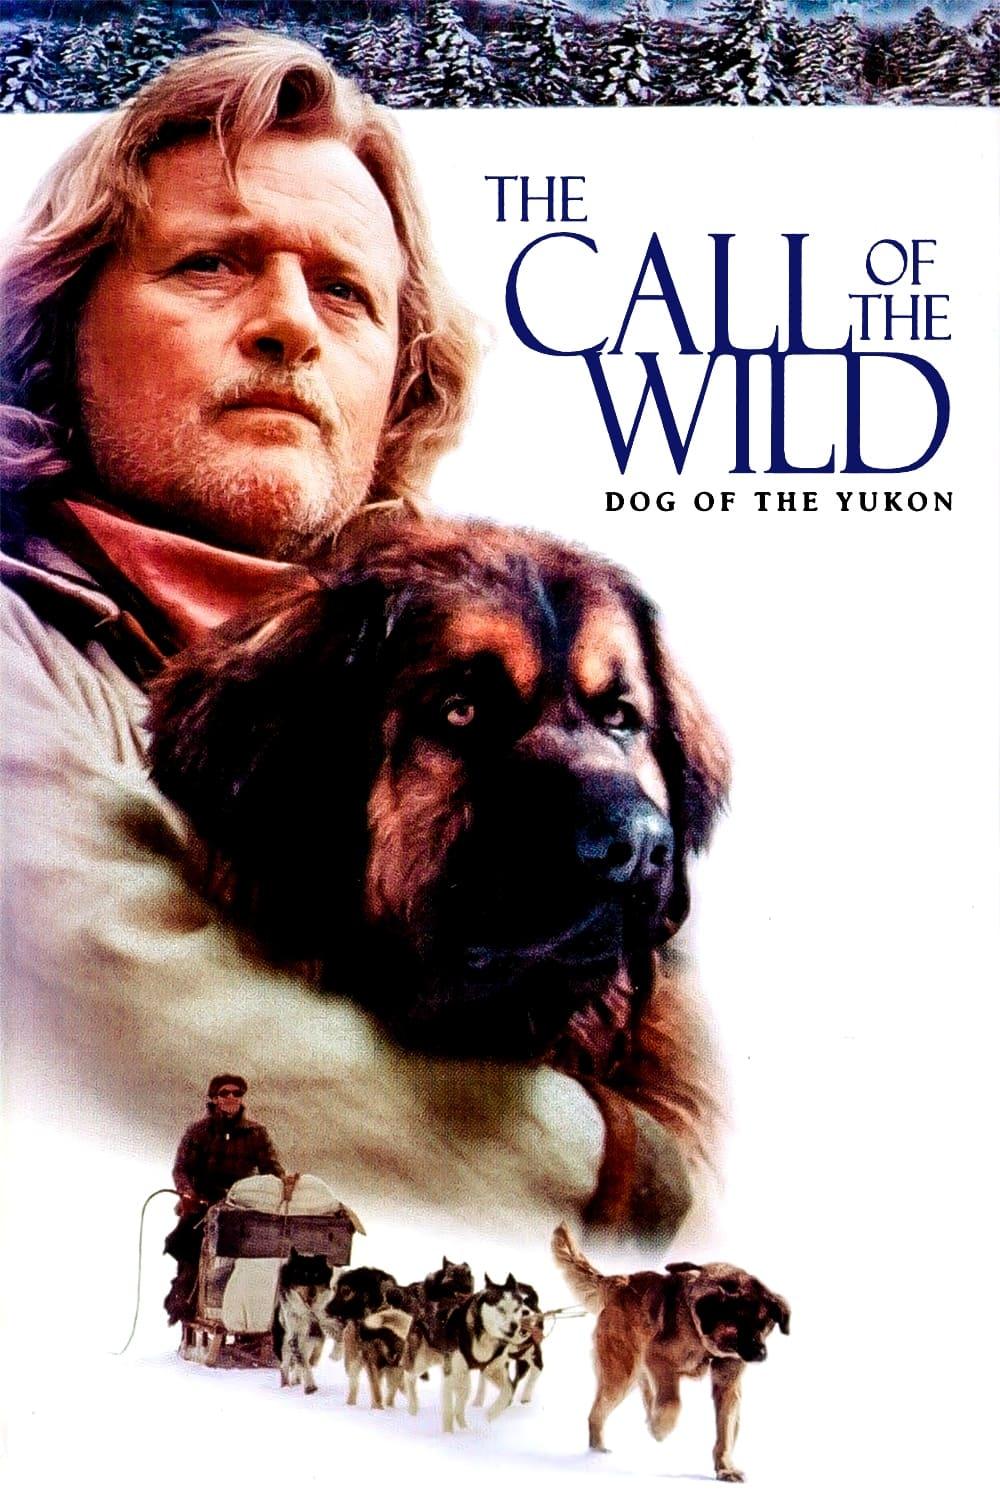 The Call of the Wild: Dog of the Yukon poster